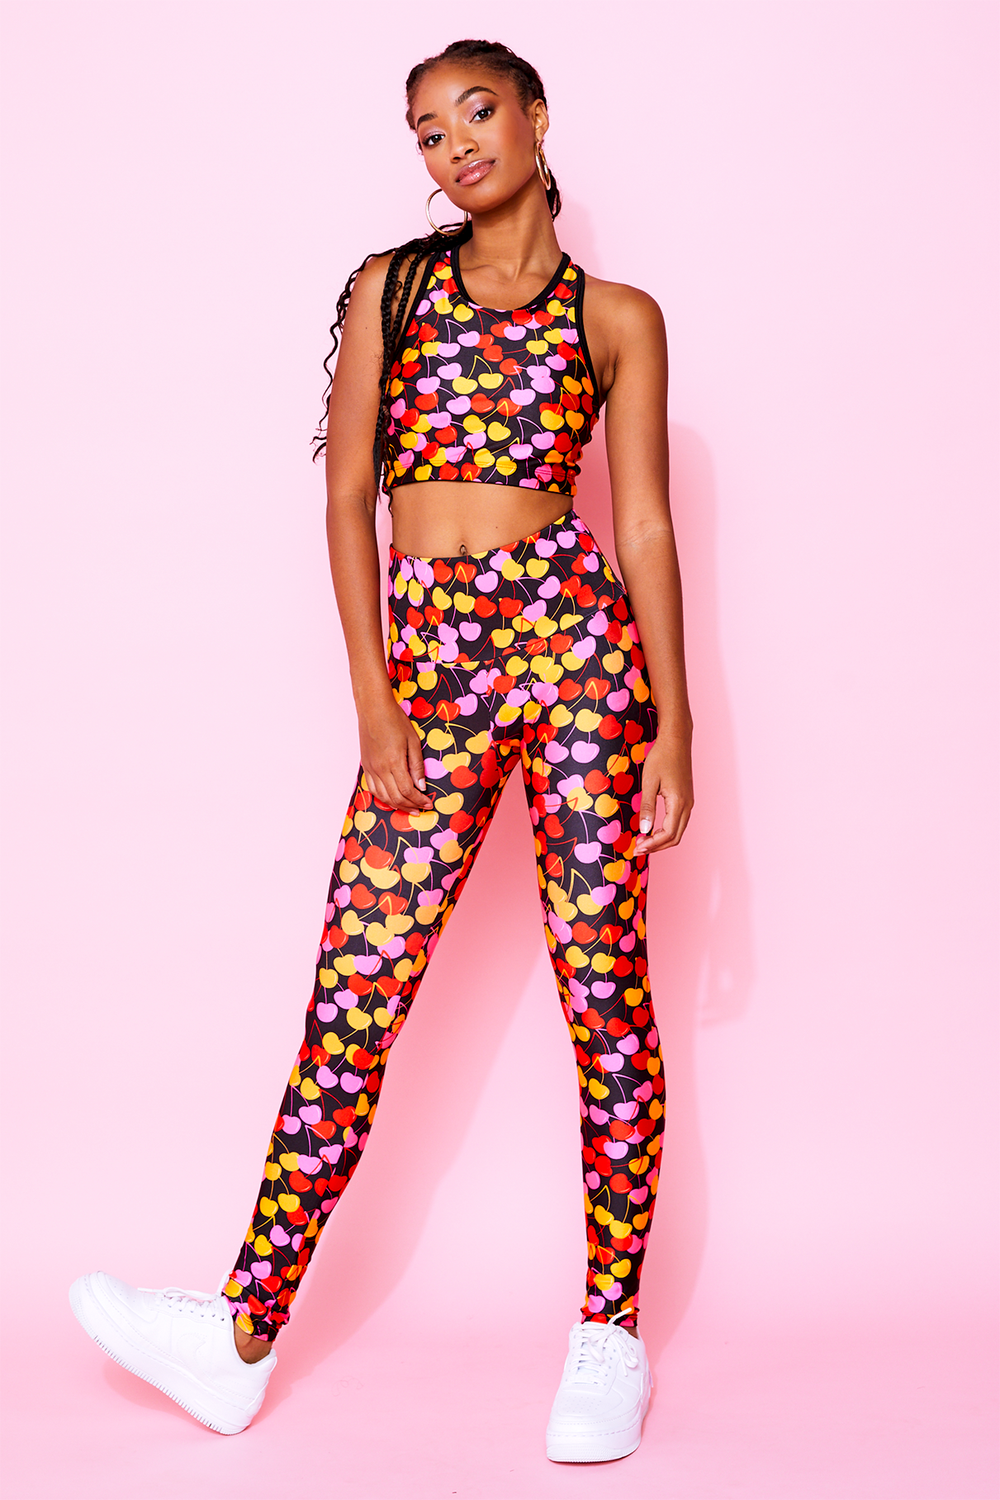 Model wearing high-waisted full-length leggings in black with yellow, pink, and red cherries all over